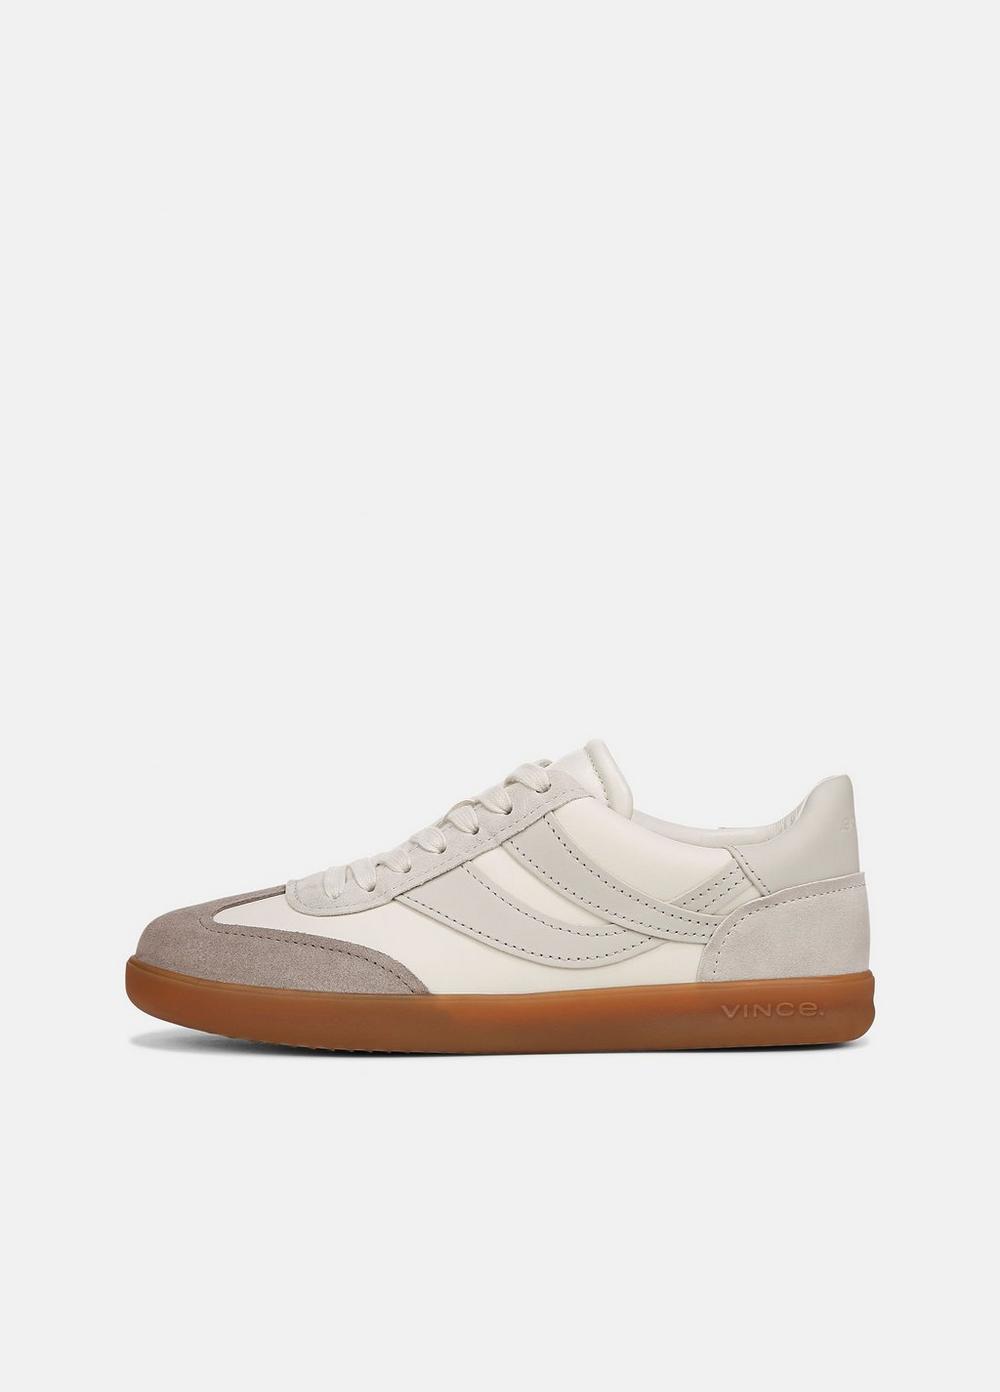 Oasis Leather And Suede Sneaker, White Foam/horchata/hazelstone, Size 9 Vince